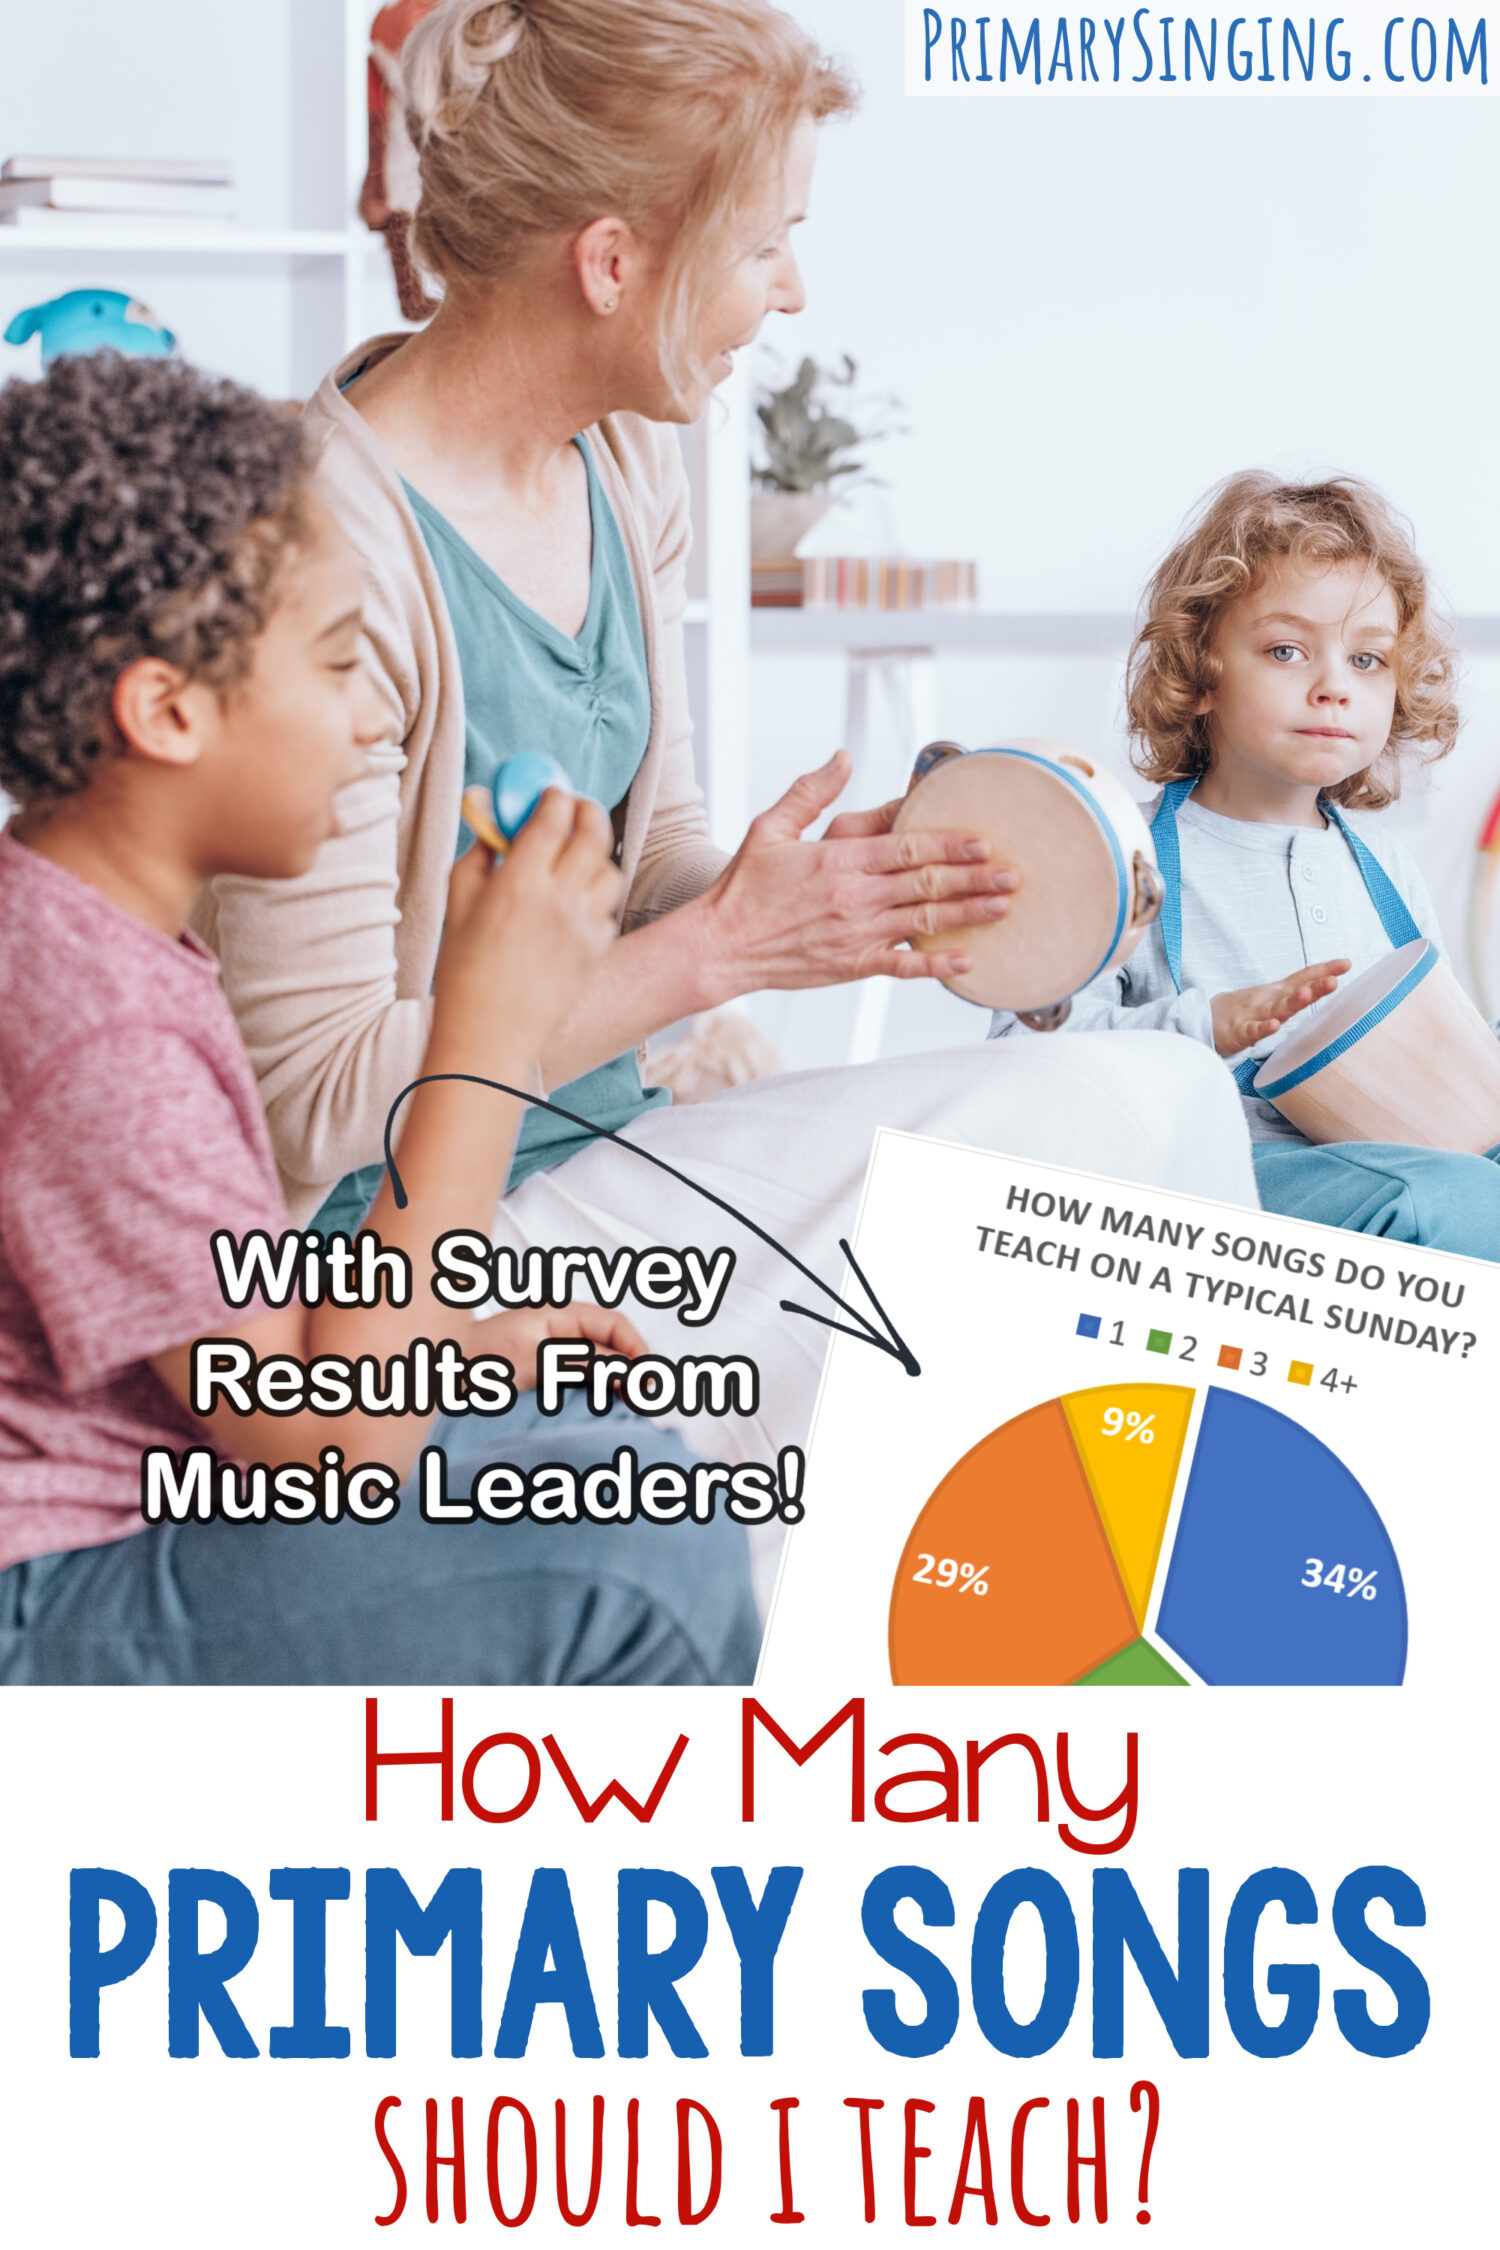 How Many Primary Songs should I teach? You'll love this DEEP dive into the most commonly asked questions from Primary Music Leaders such as how many songs they typically teach on a typical Sunday, if they sing transition or extra songs, how many verses to teach, and if they teach special songs! The answers are results from a survey with stats that are SO fascinating!